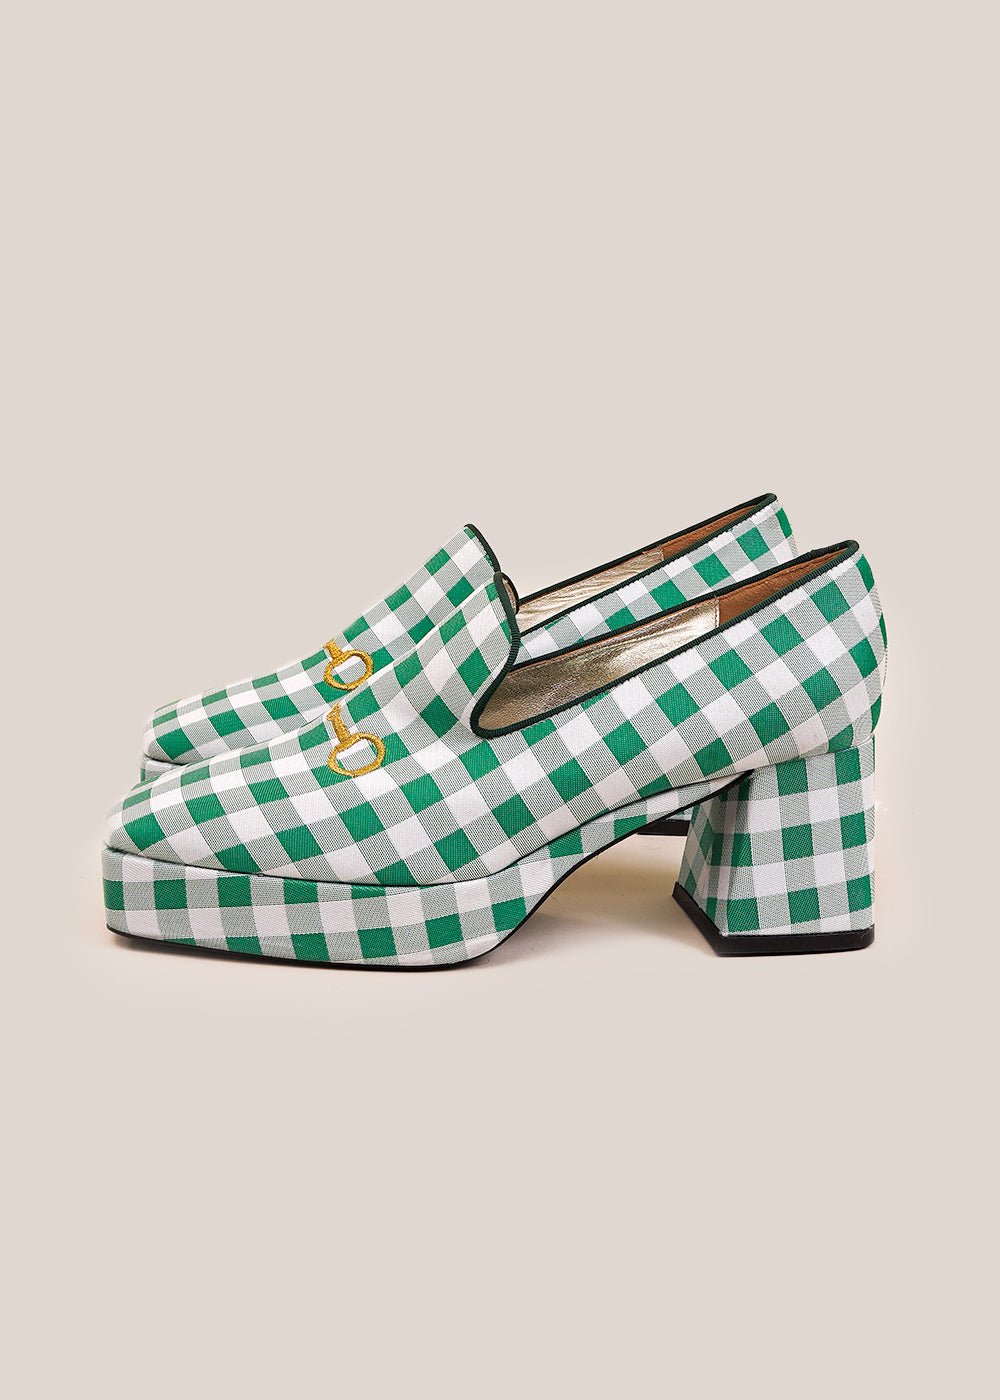 Suzanne Rae Vichy Platform Loafer - New Classics Studios Sustainable Ethical Fashion Canada